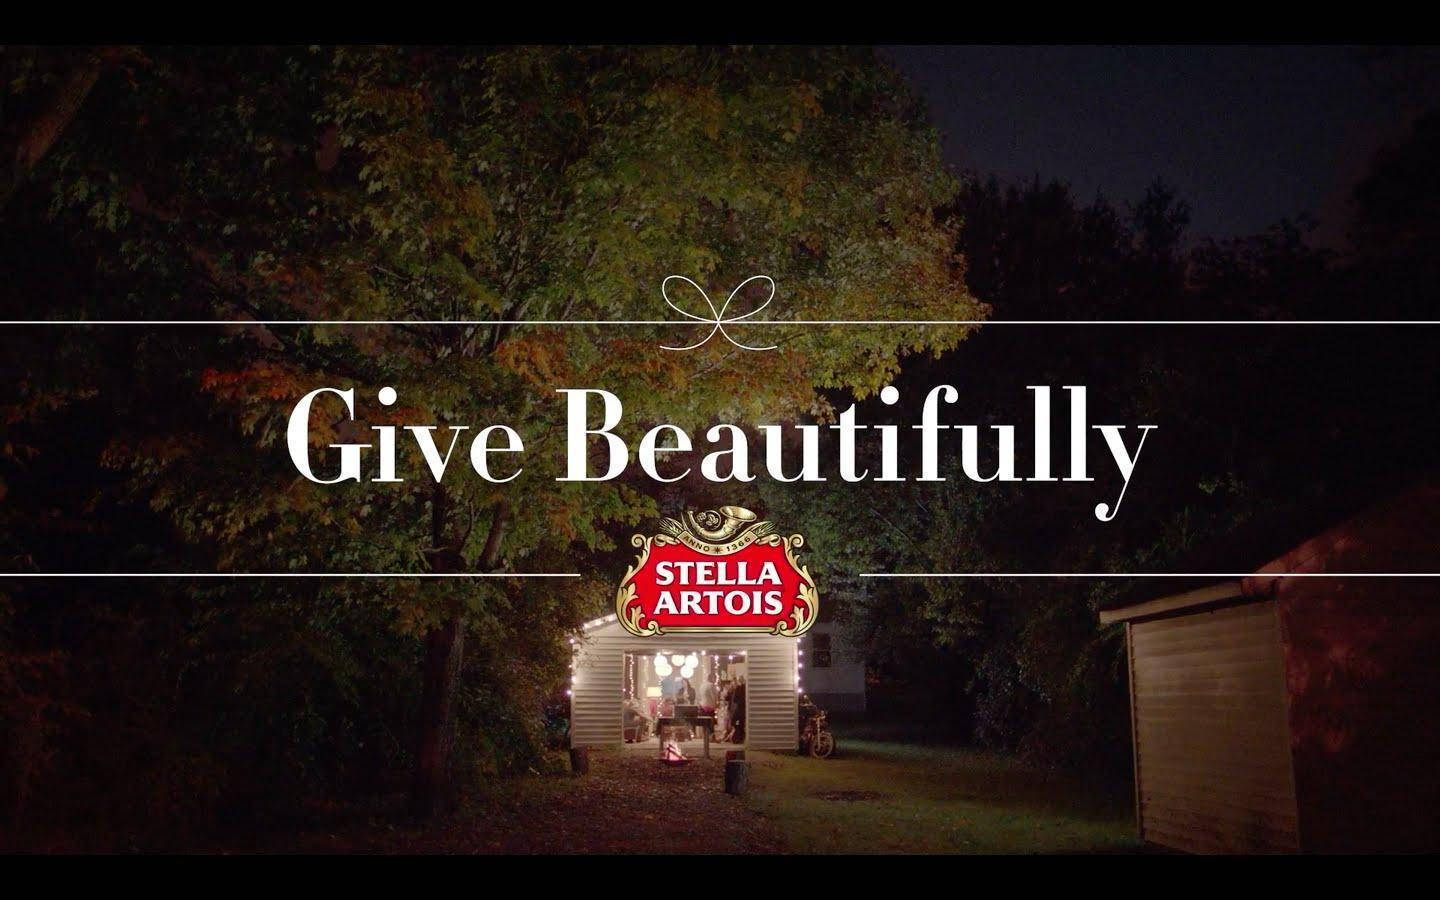 Give Beautifully Stella Artois Beer 2014 Commercial Wallpaper